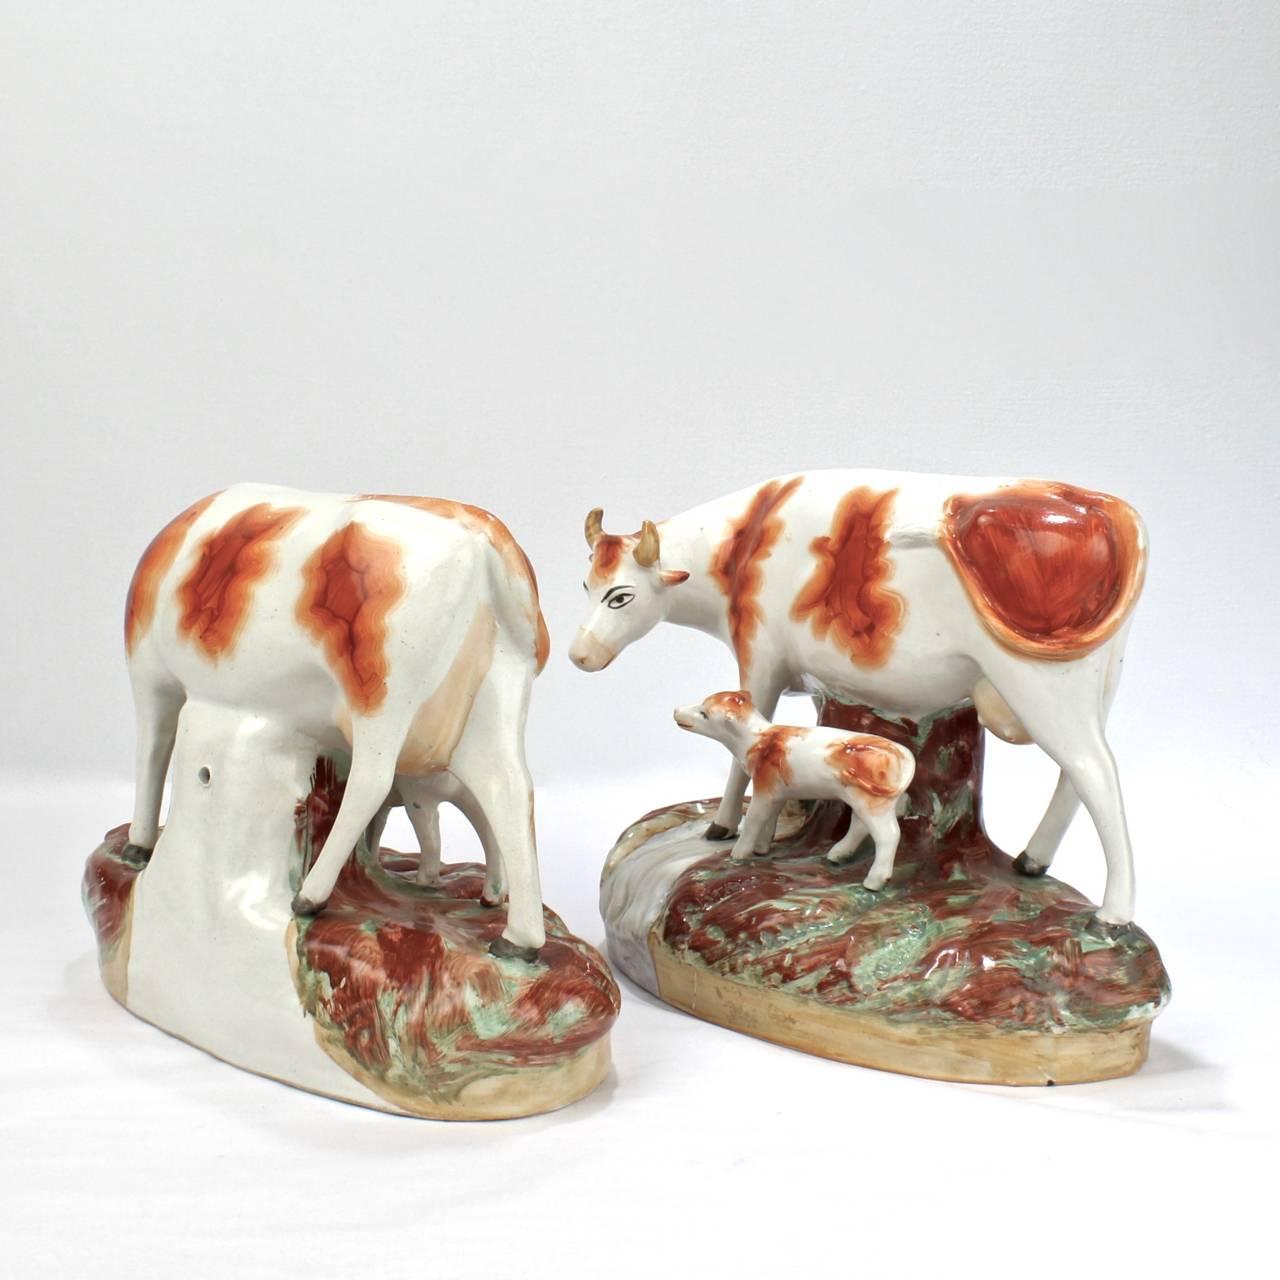 English Matched Pair of 19th Century Century Staffordshire Pottery Cow & Calf Figurines